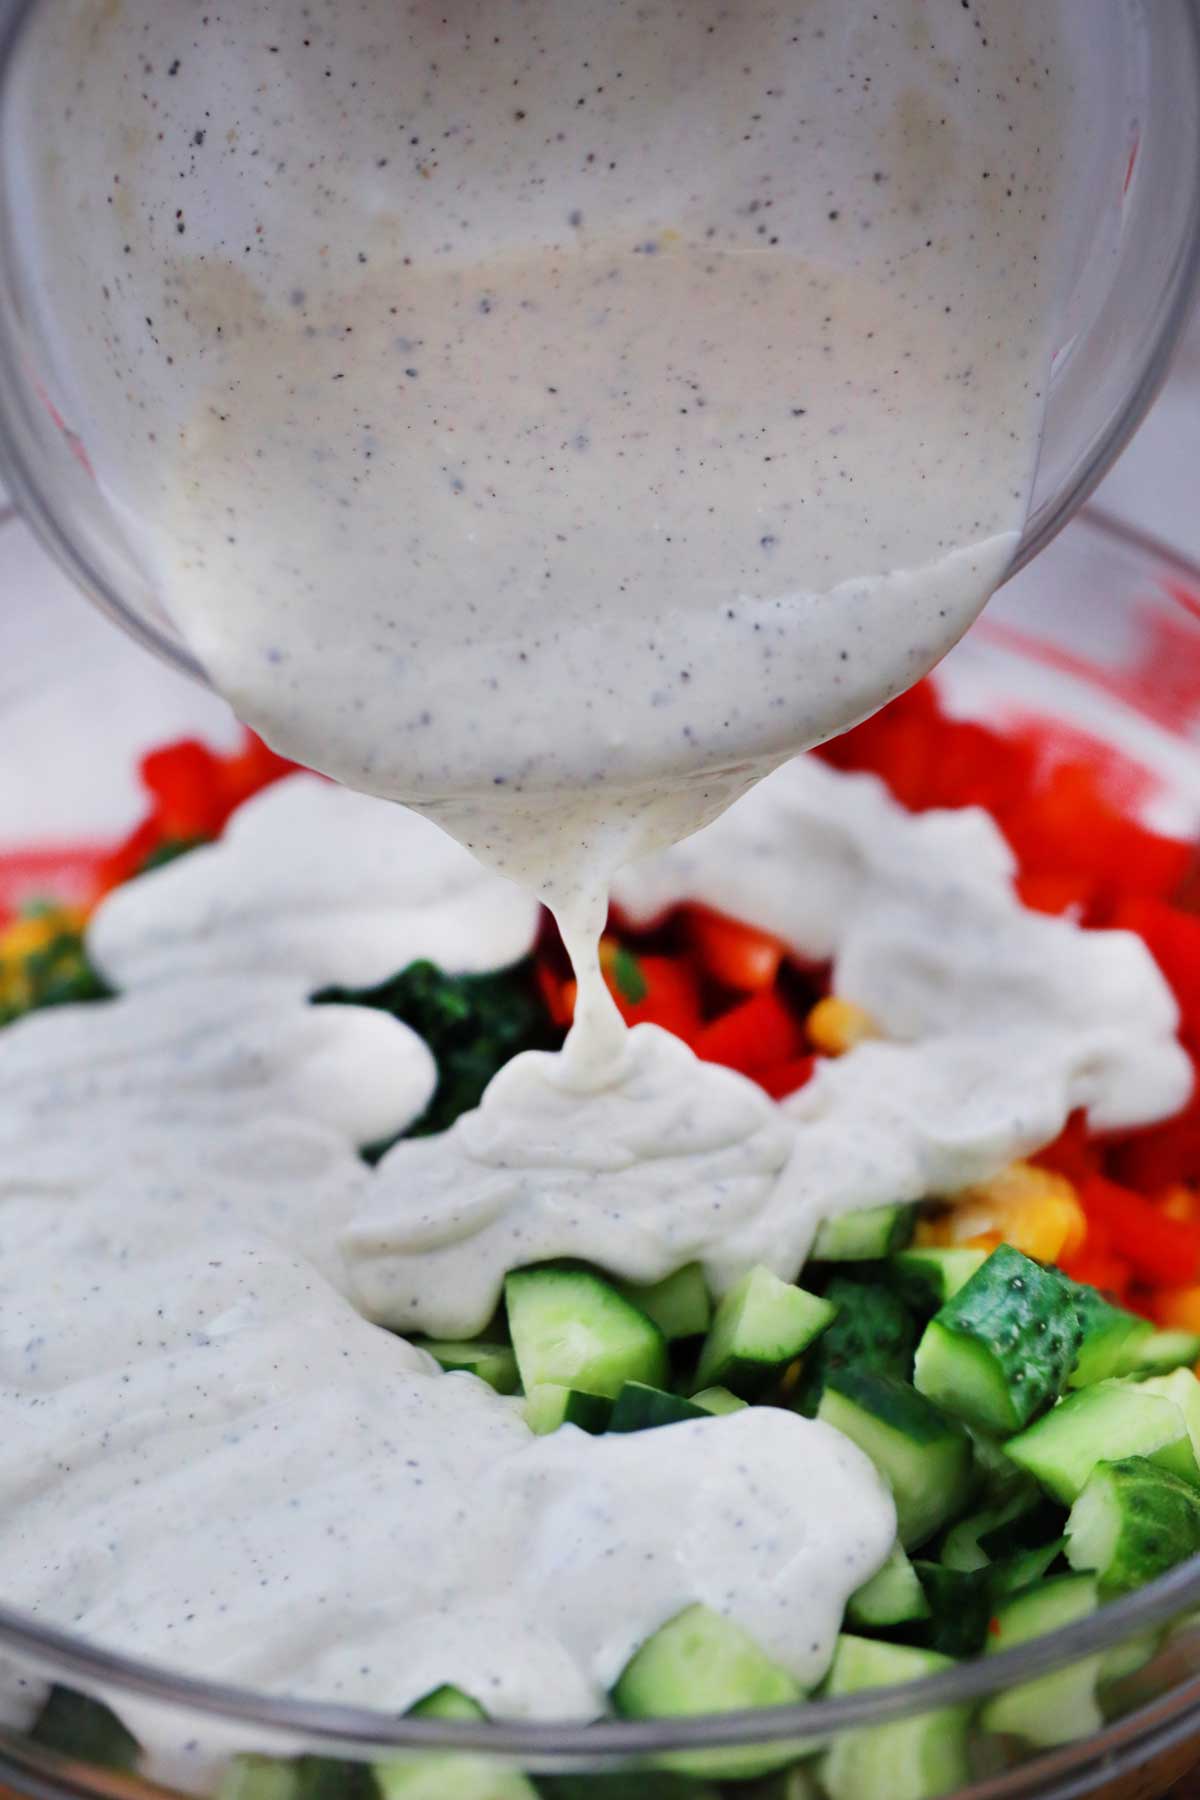 Pouring dressing over salad